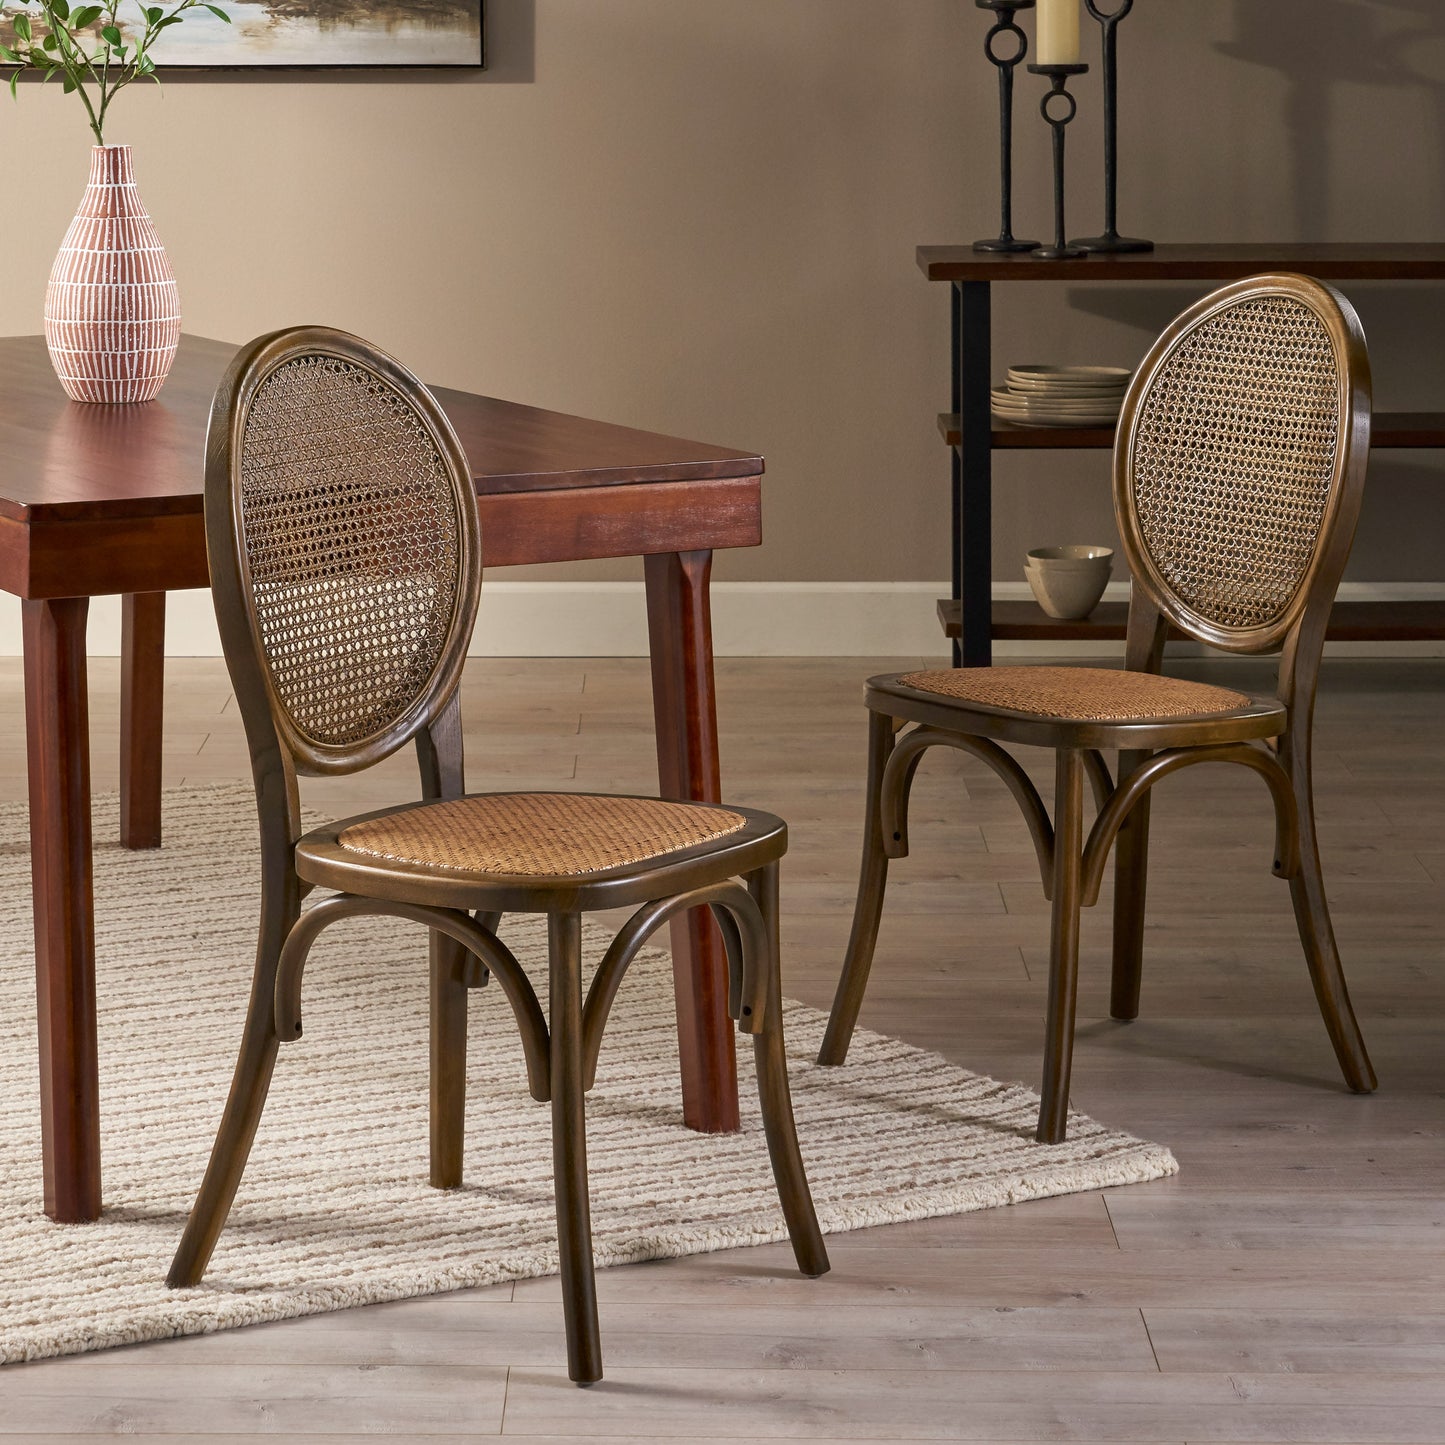 Denni Wooden Cane Back Dining Chair (Set of 2)